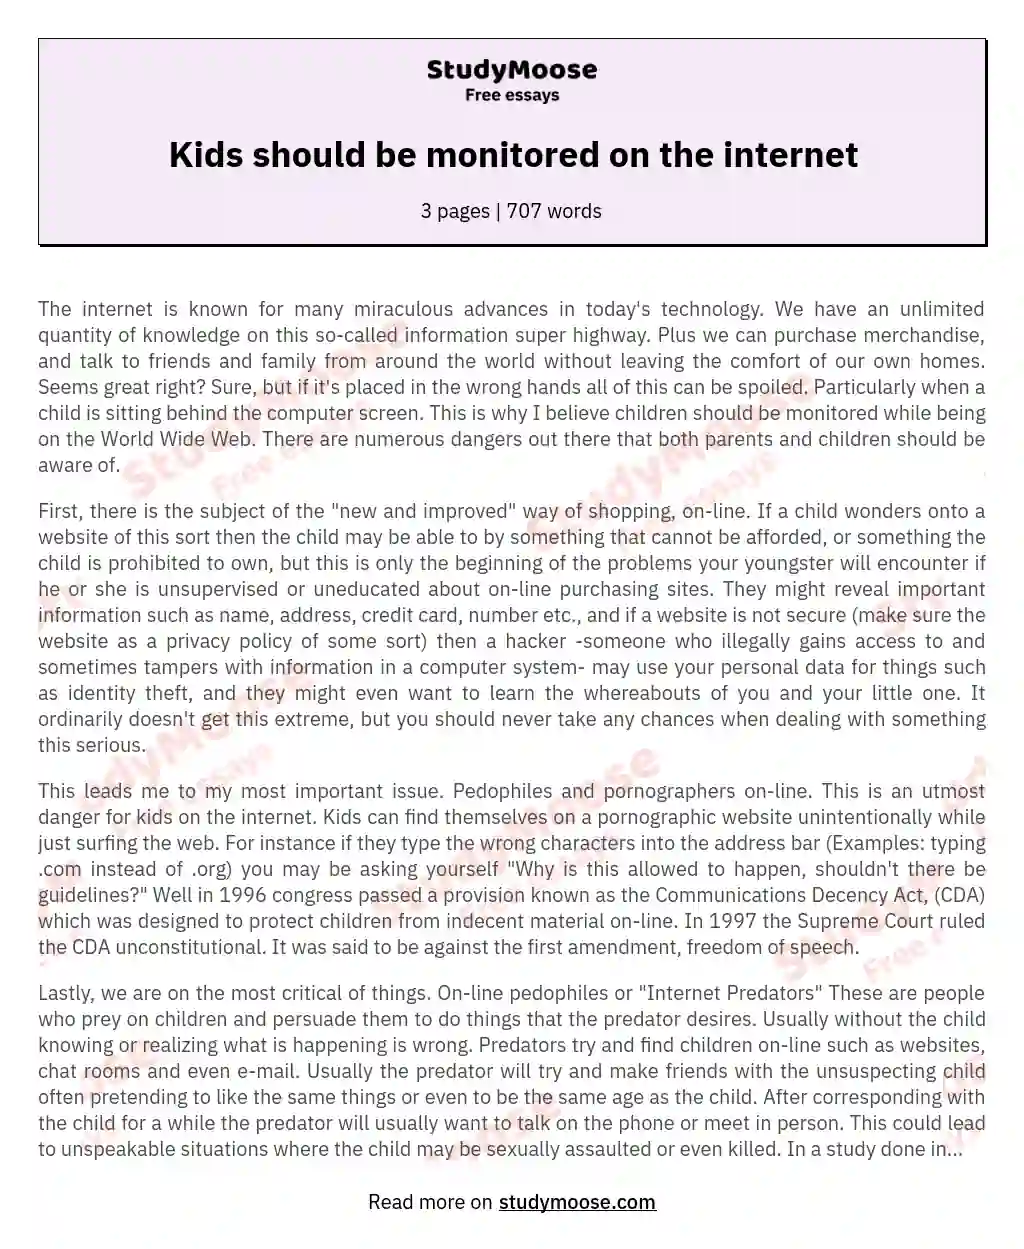 Kids should be monitored on the internet essay